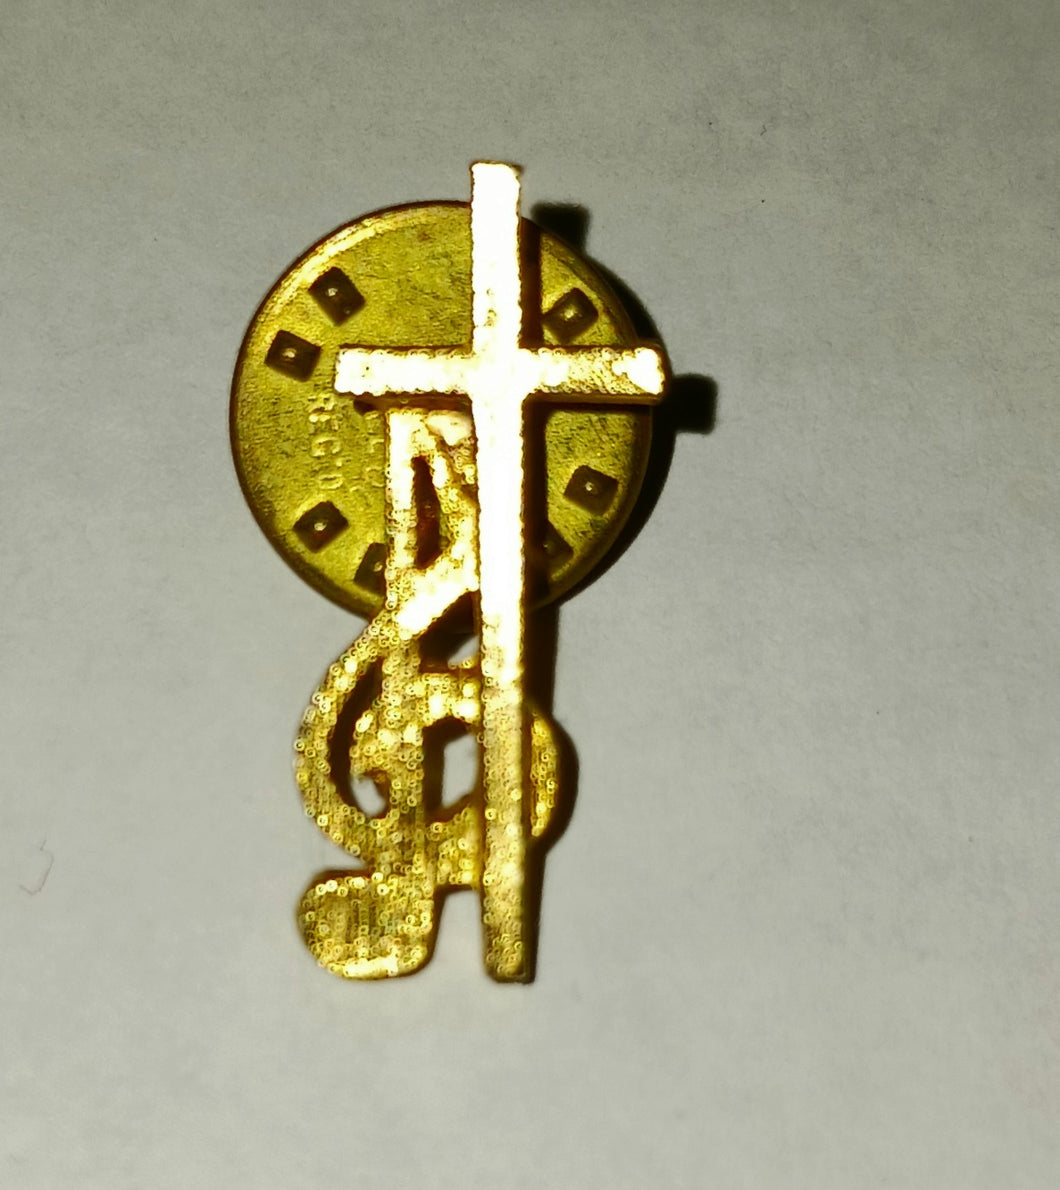 Religious Cross with Music Note Gold Tone Metal Lapel Pin